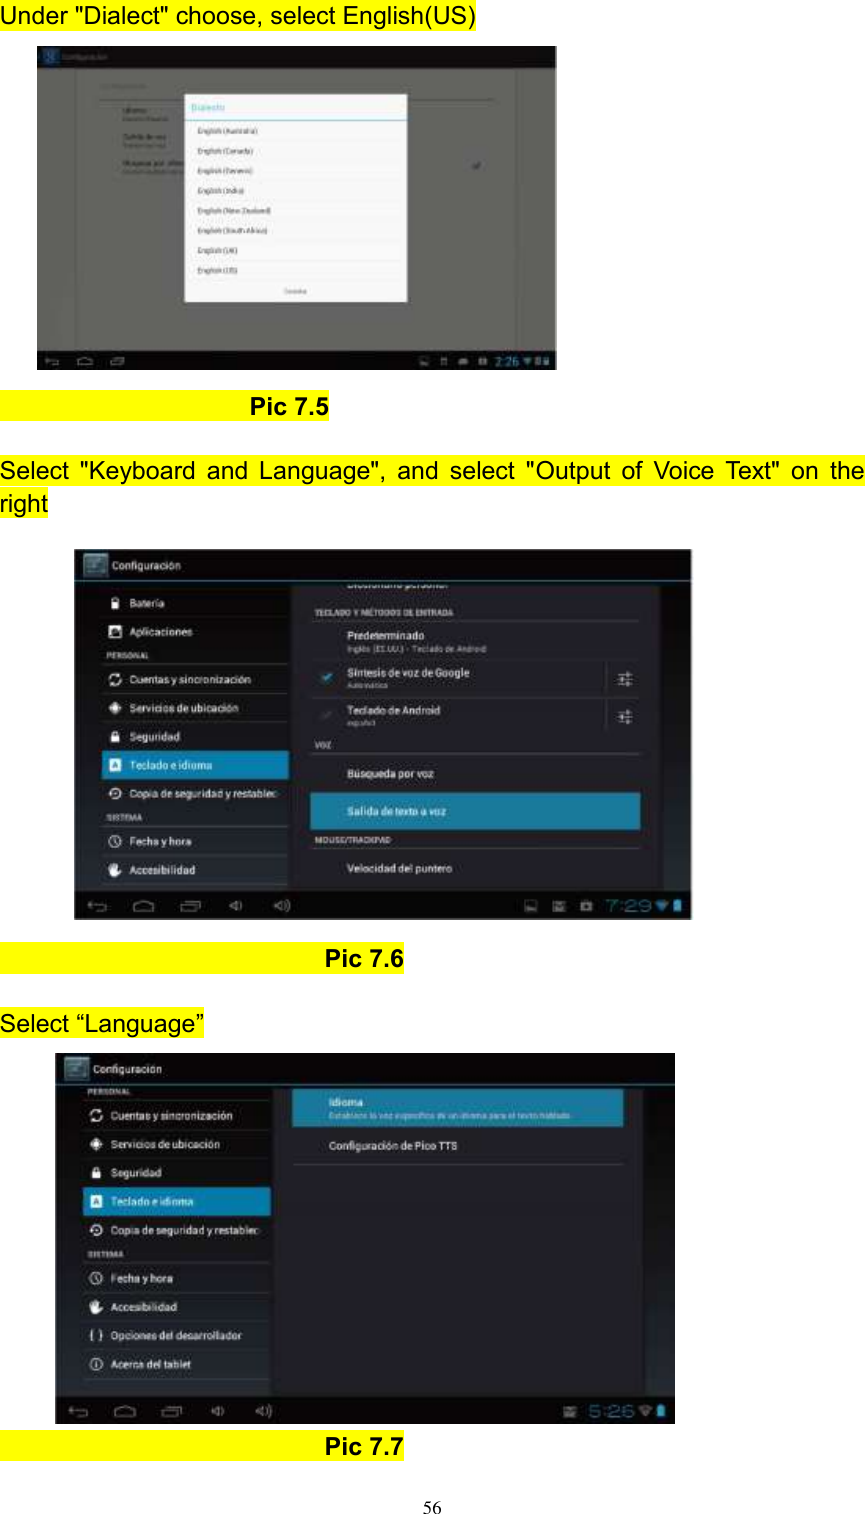      56 Under &quot;Dialect&quot; choose, select English(US)                                Pic 7.5  Select &quot;Keyboard and Language&quot;, and select &quot;Output  of Voice Text&quot; on  the right                                        Pic 7.6  Select “Language”                                       Pic 7.7  